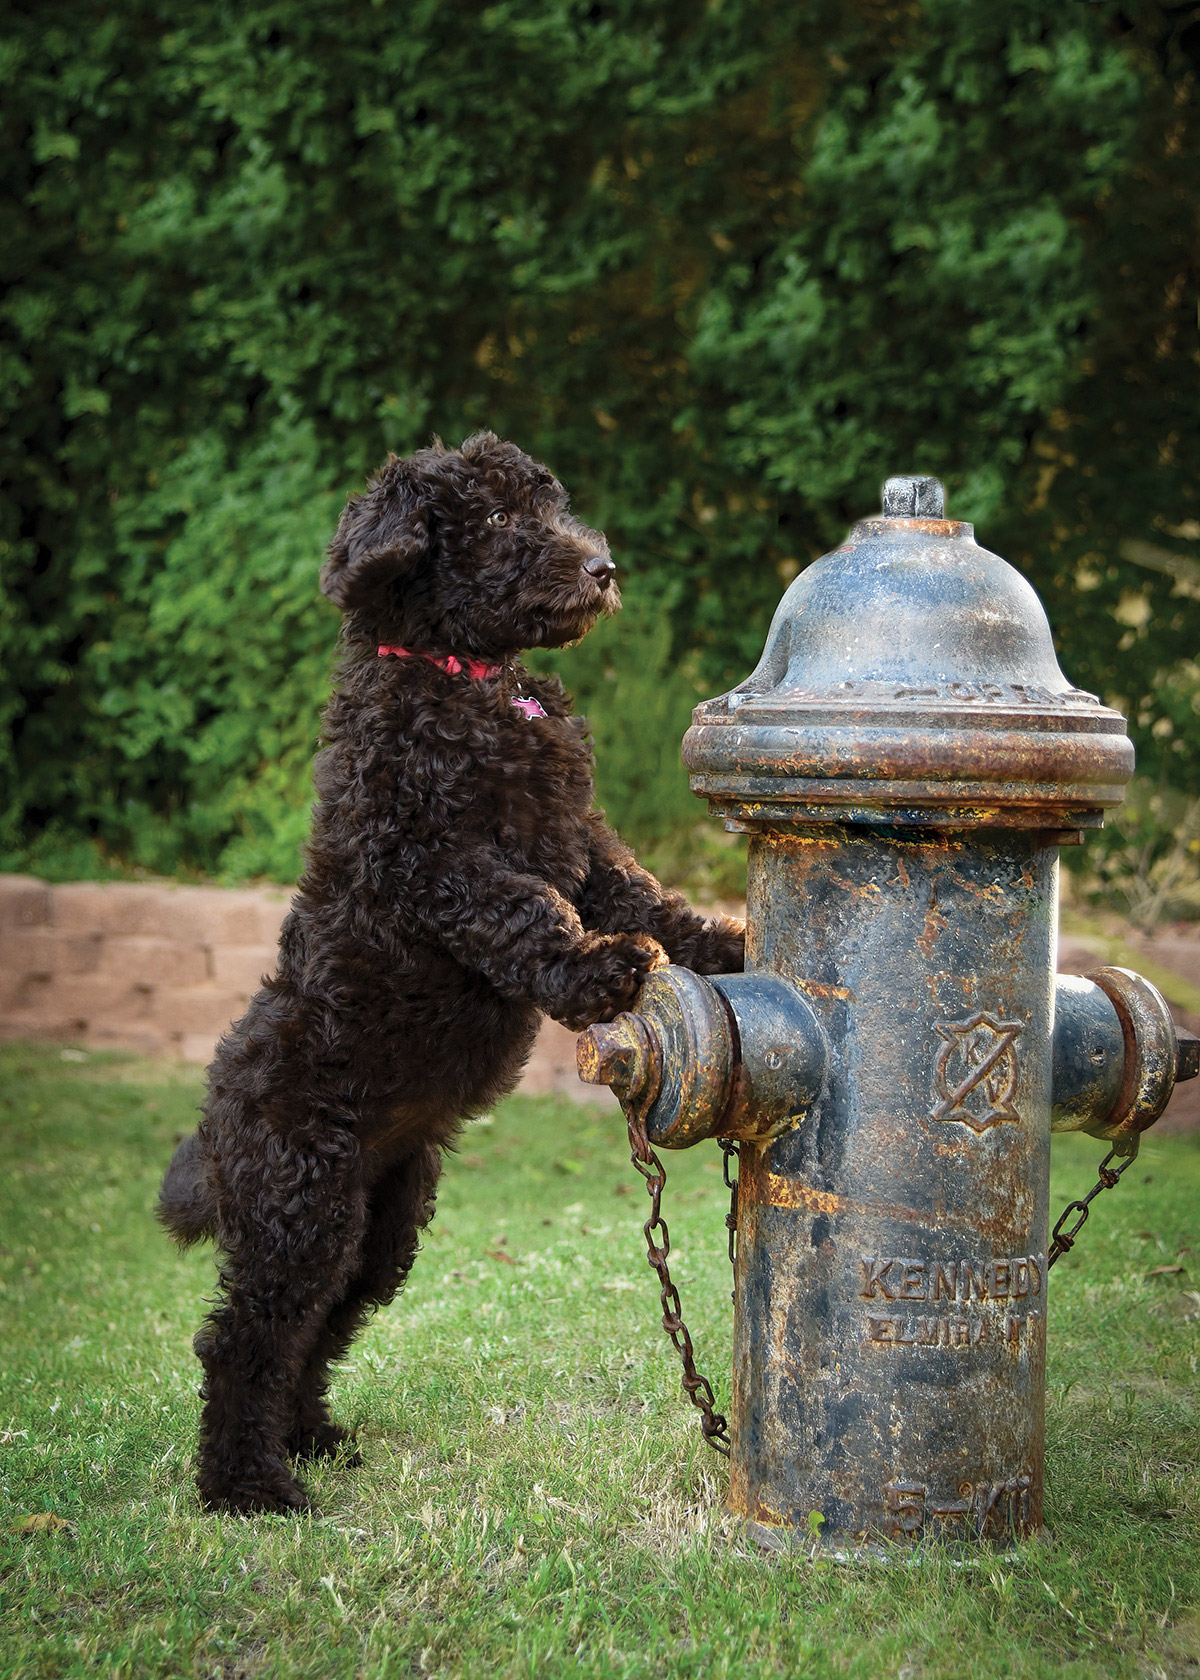 Black dog standing on hind legs with front legs on a fire hydrant